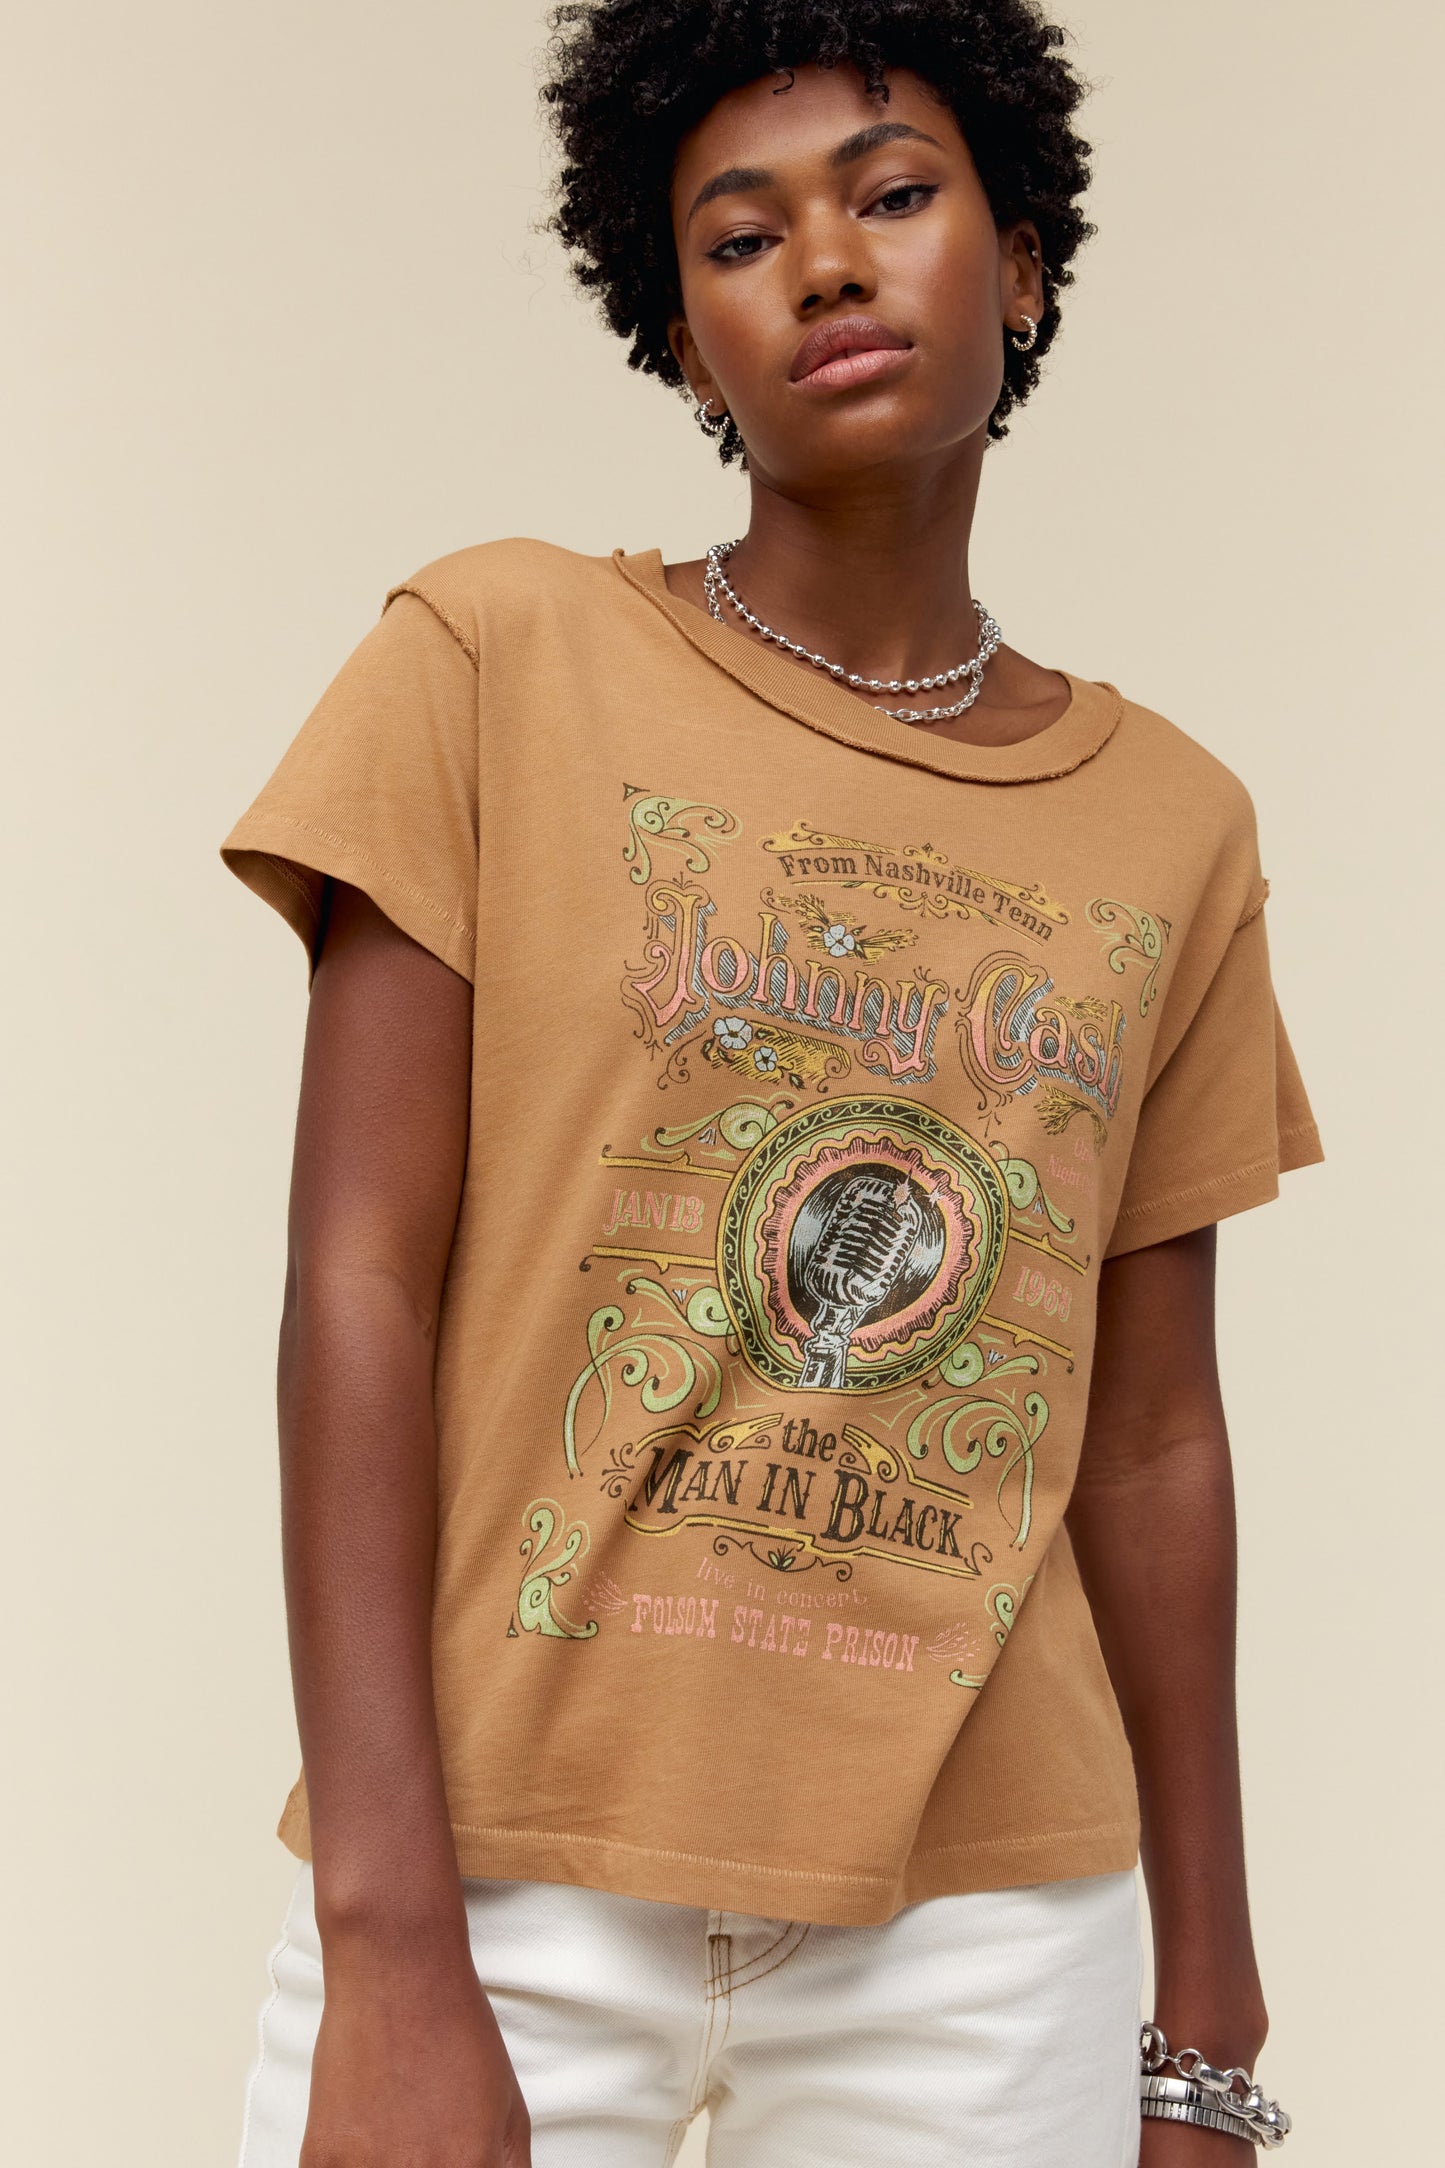 A model featuring a hazelnut colored Johnny Cash gf tee stamped with "Man in Black" and a microphone label placing spotlight on “Johnny Cash at Folsom Prison”.